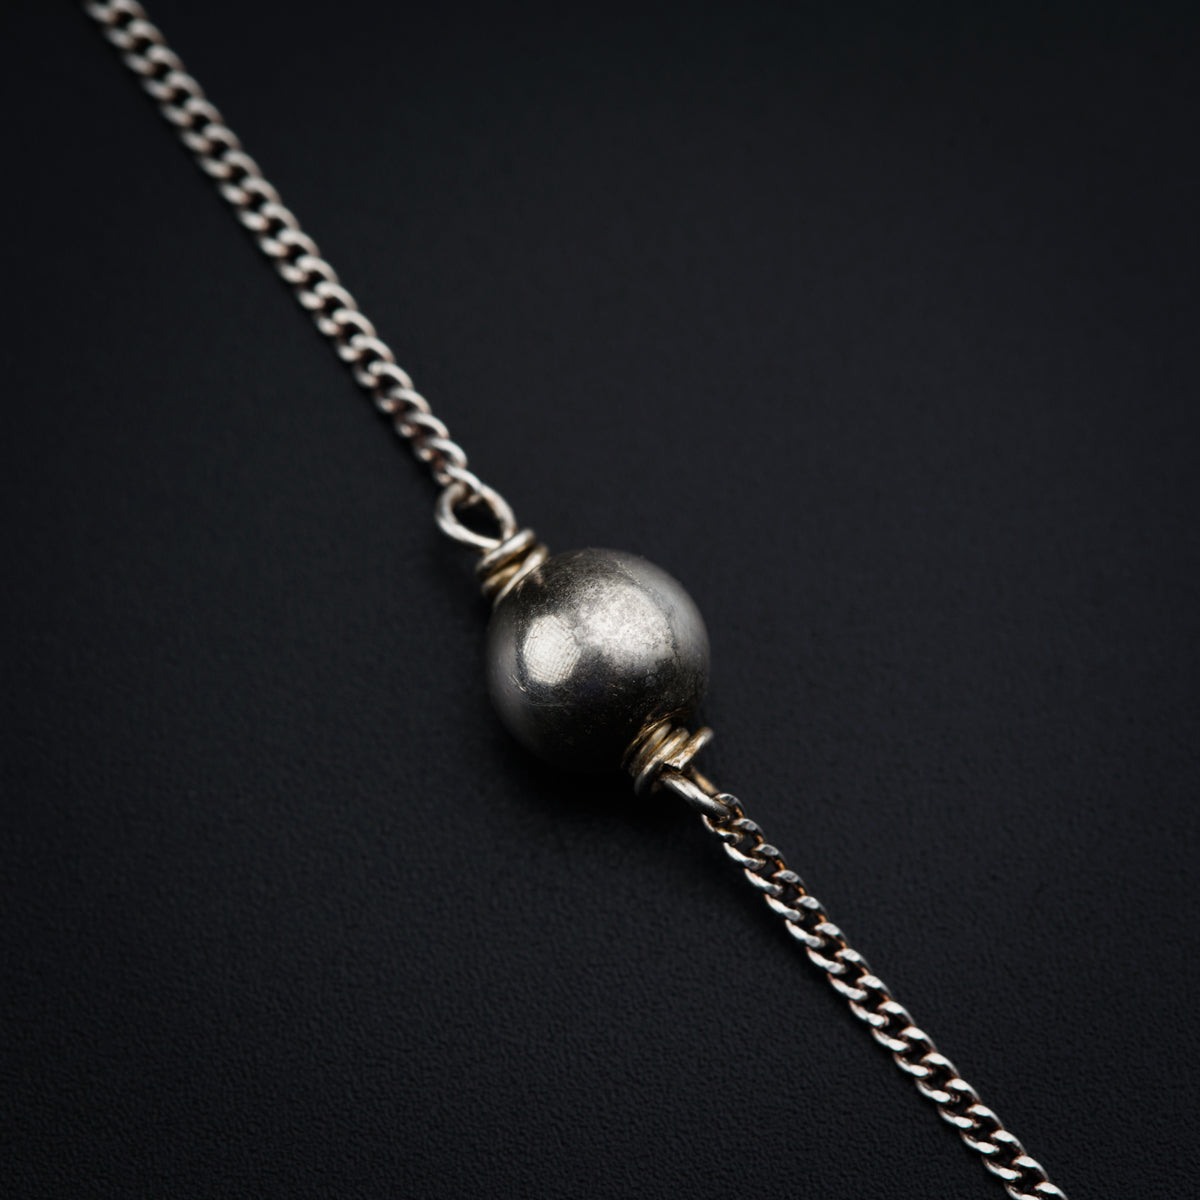 a silver ball on a chain on a black surface